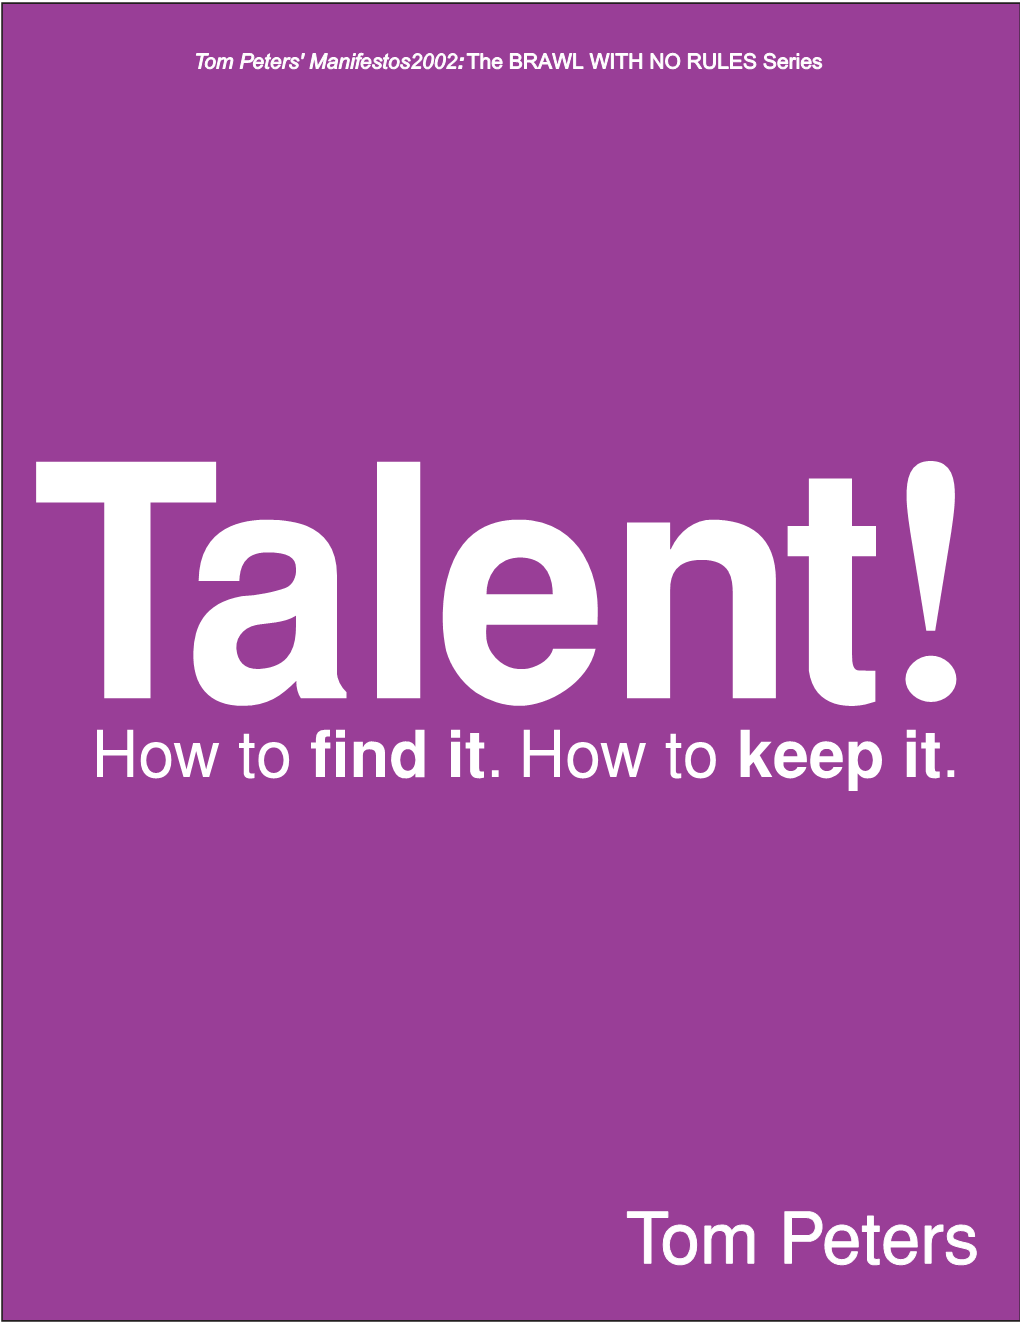 Talent Who Are We? a Three-Generation Report Card Work What’S Our Story? with No Rules How to Find It